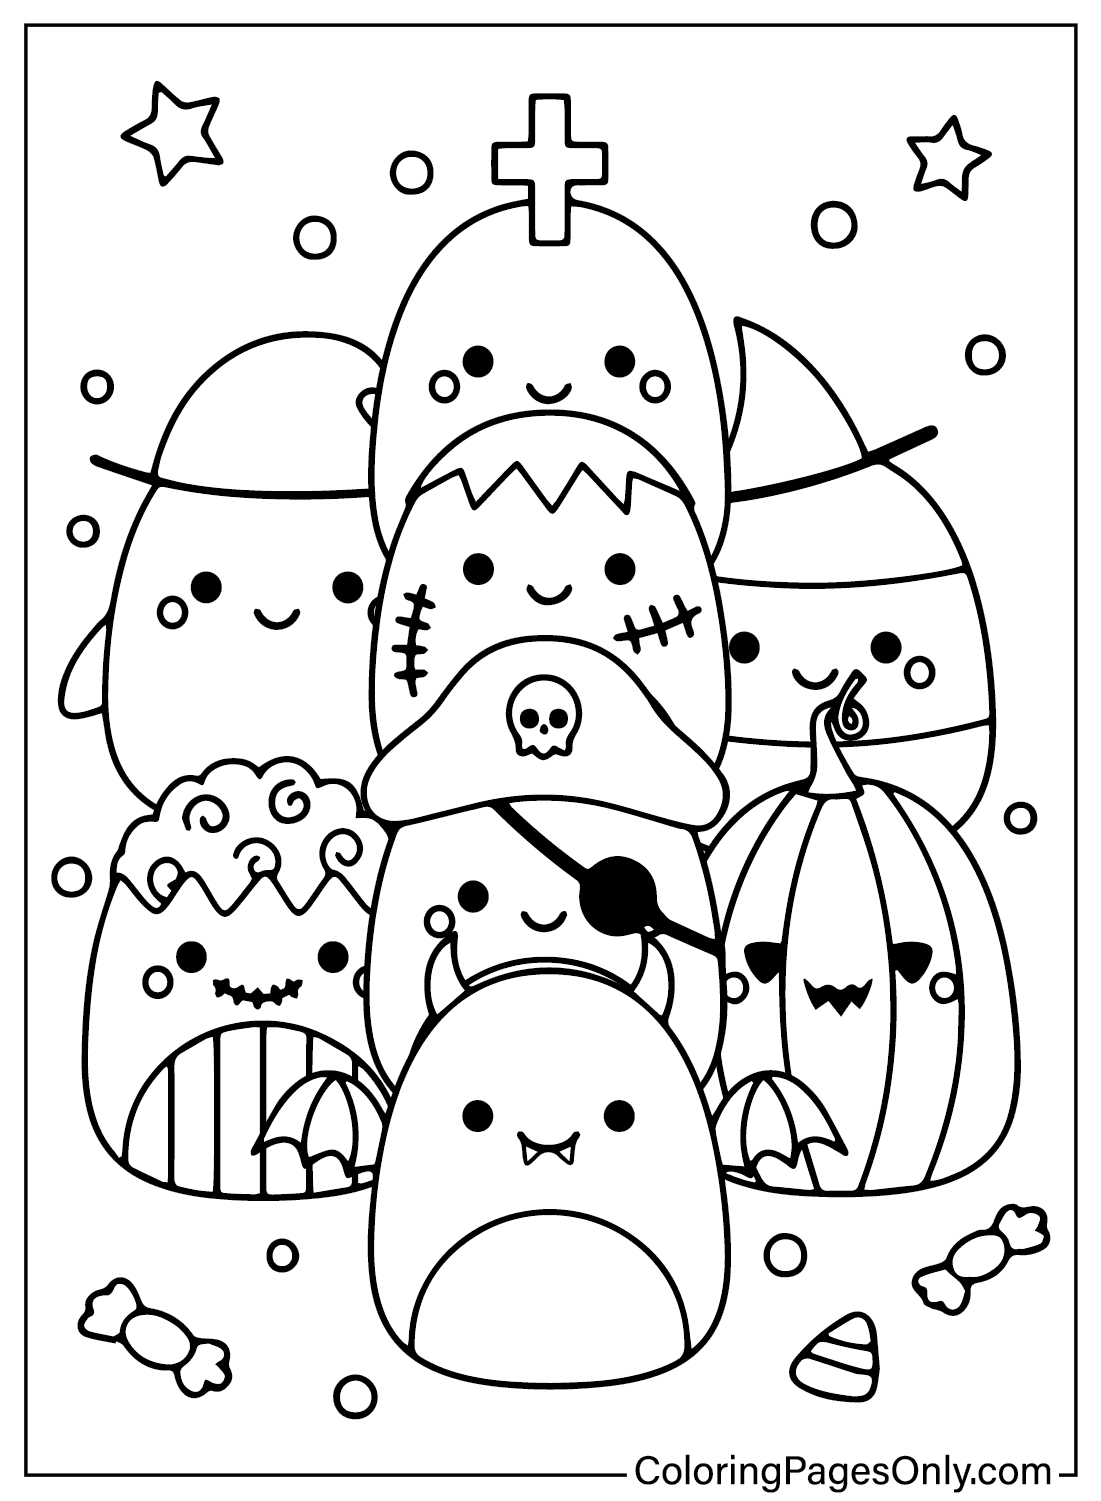 Squishmallow Halloween Coloring Sheet from Squishmallow Halloween